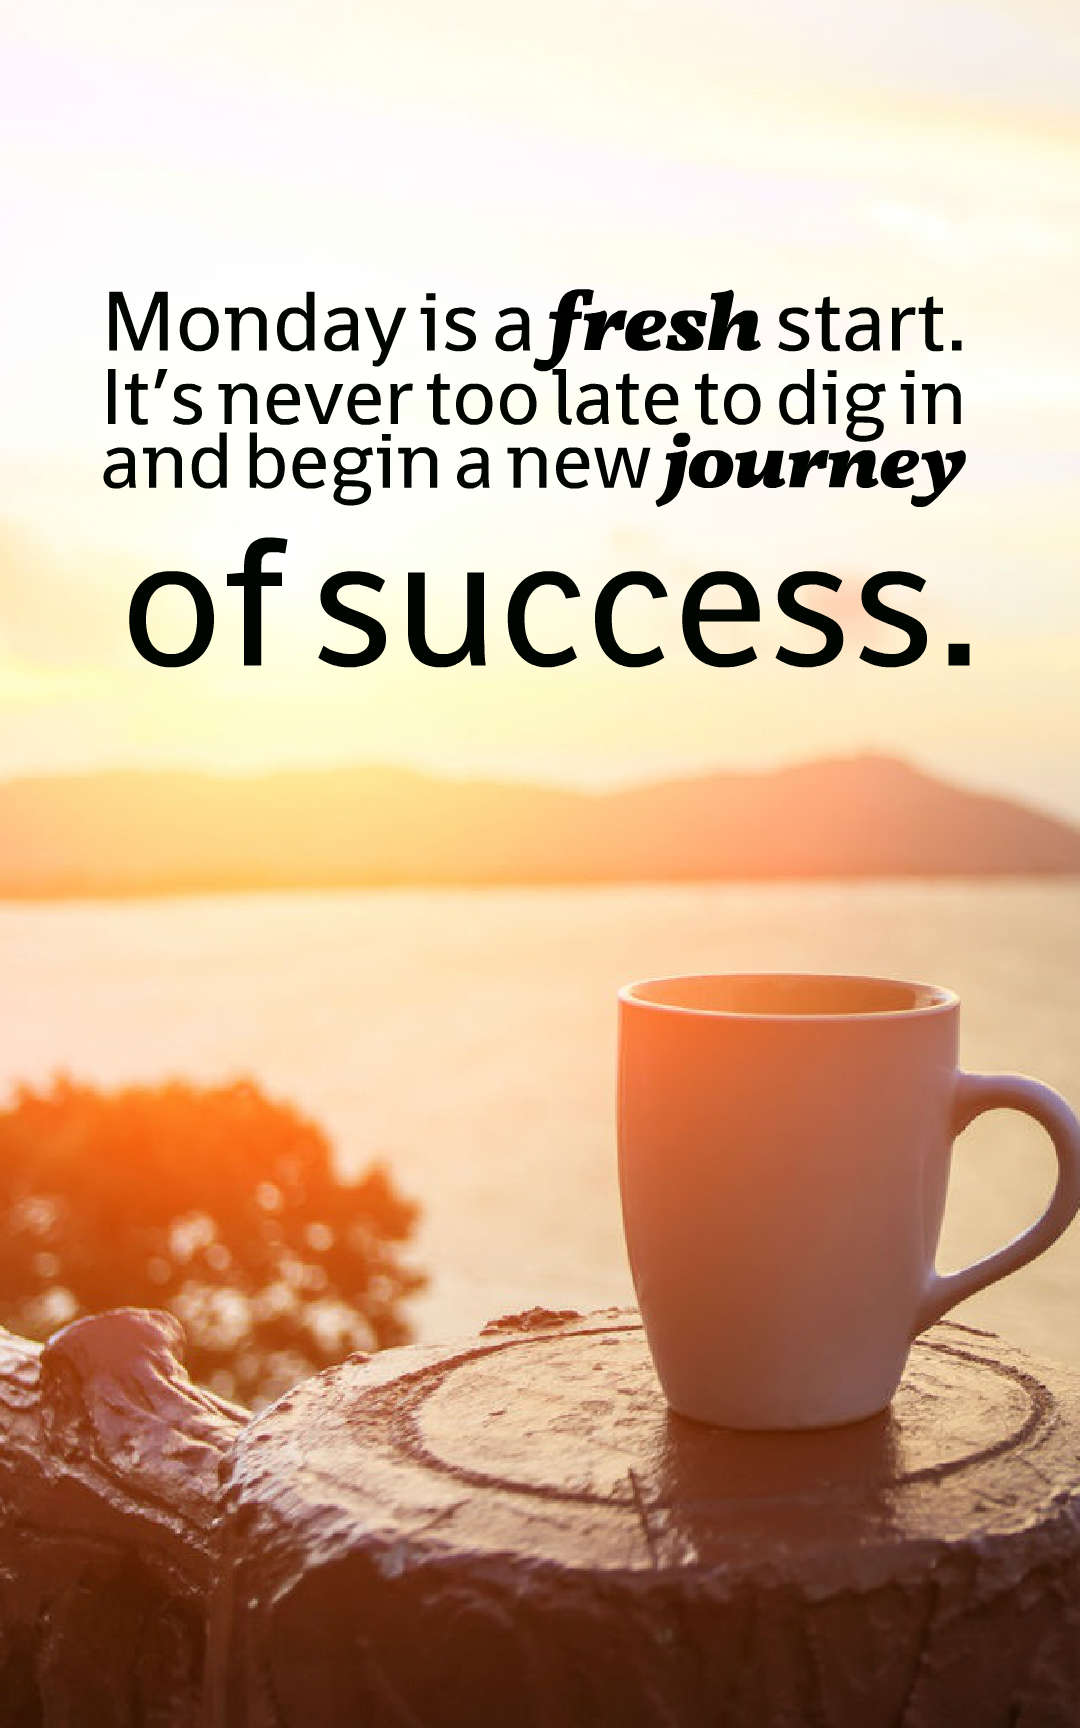 Monday is a fresh start. It’s never too late to dig in and begin a new journey of success.